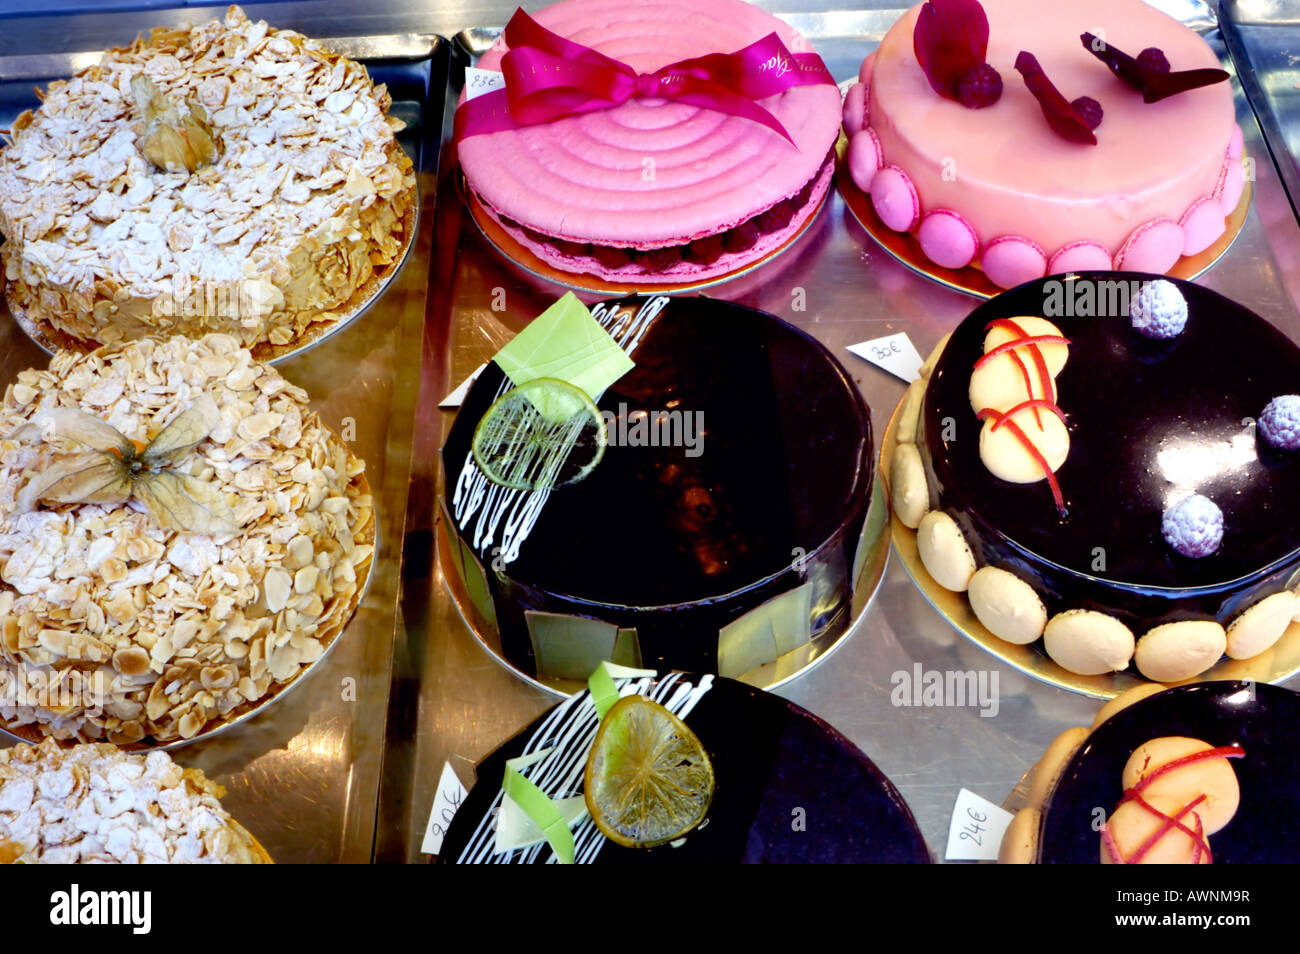 French Food, France Shopping Bakery Store French Cakes 'Gaulupeau' Patisserie Pastries Display Stock Photo